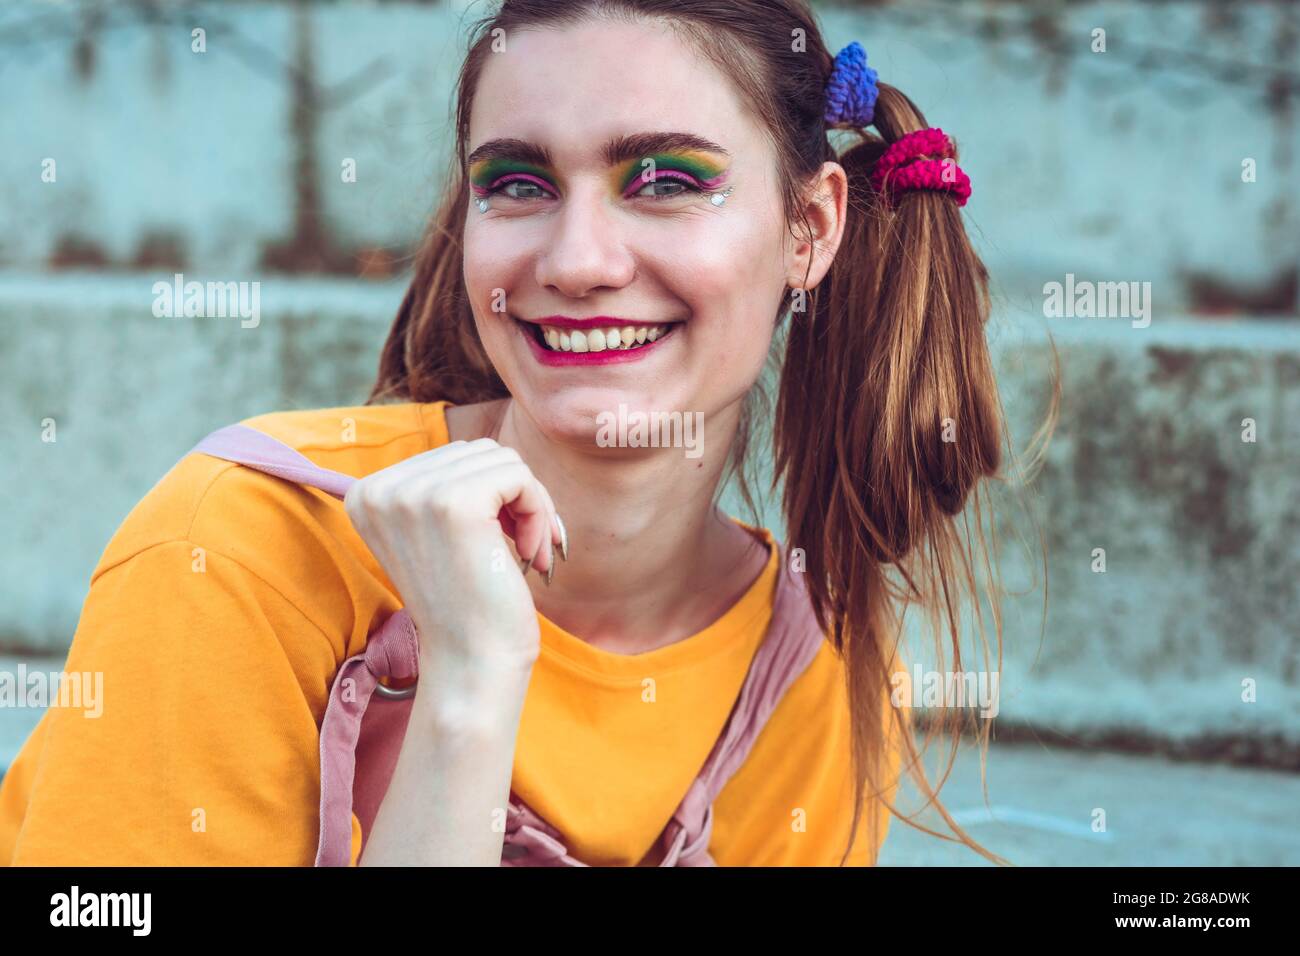 Portrait of a young, blonde girl with pigtails. Strong make up Stock Photo